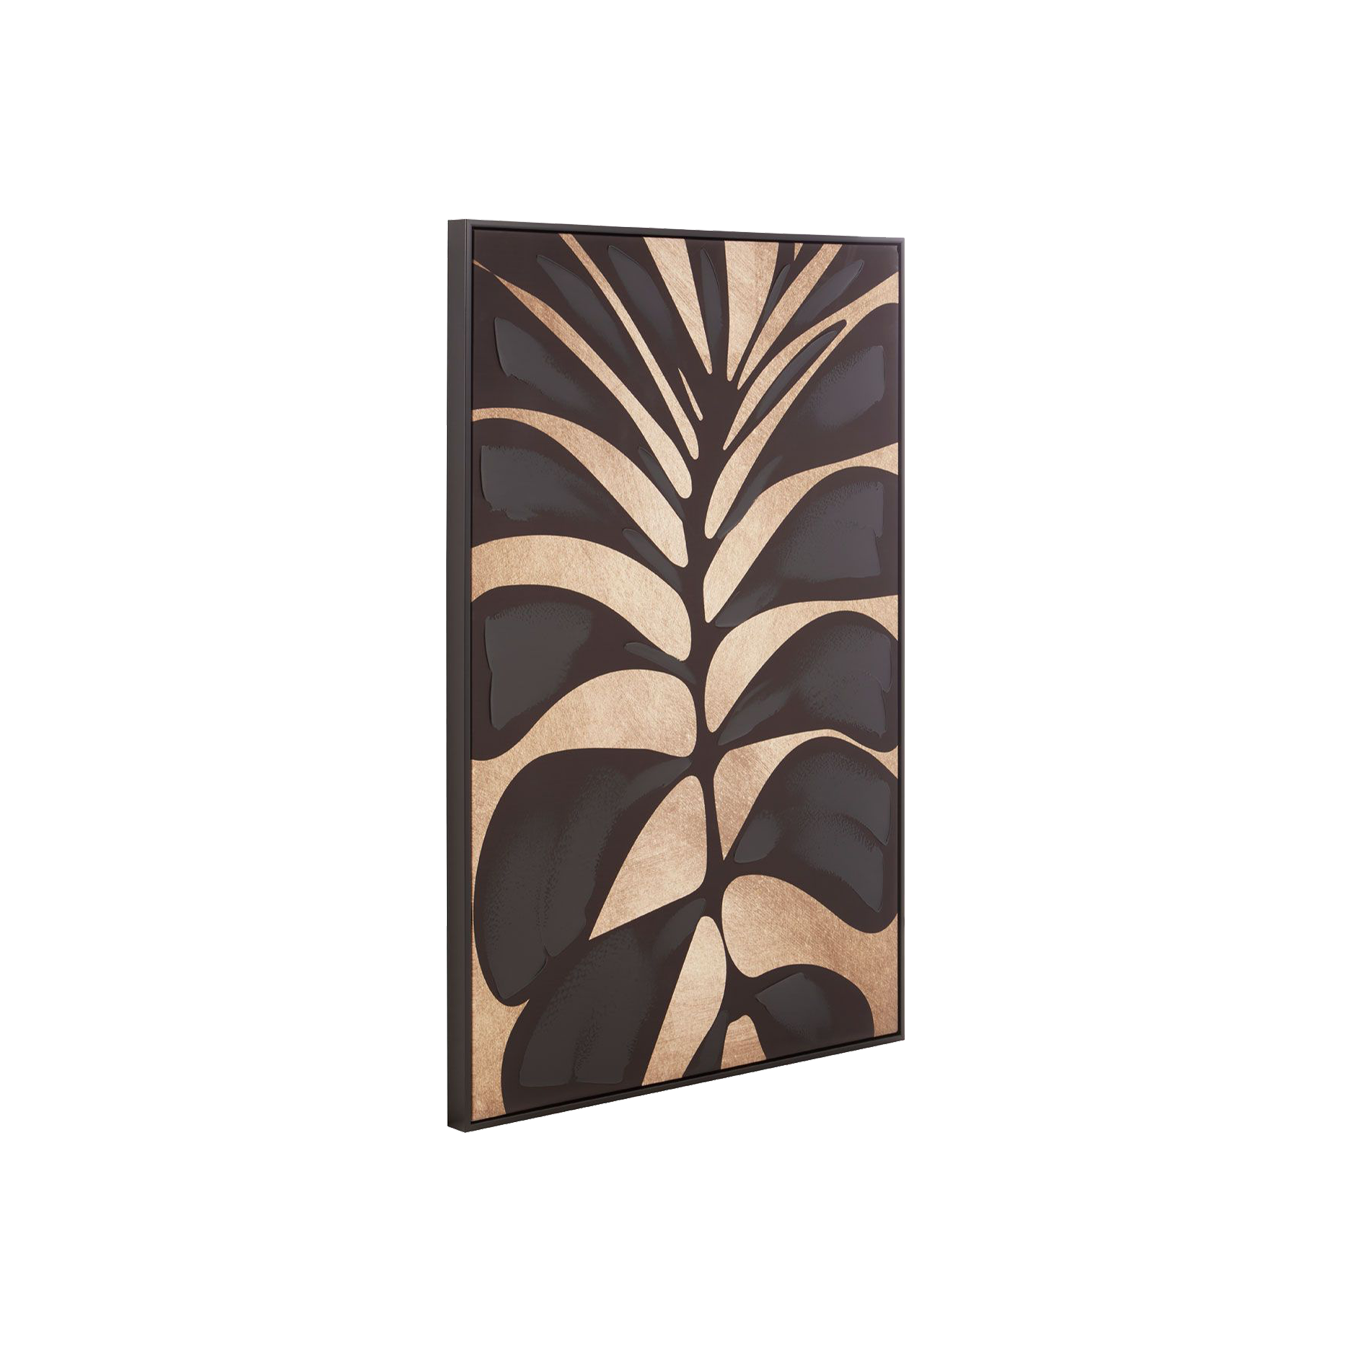 Astratto Nature Wall Art